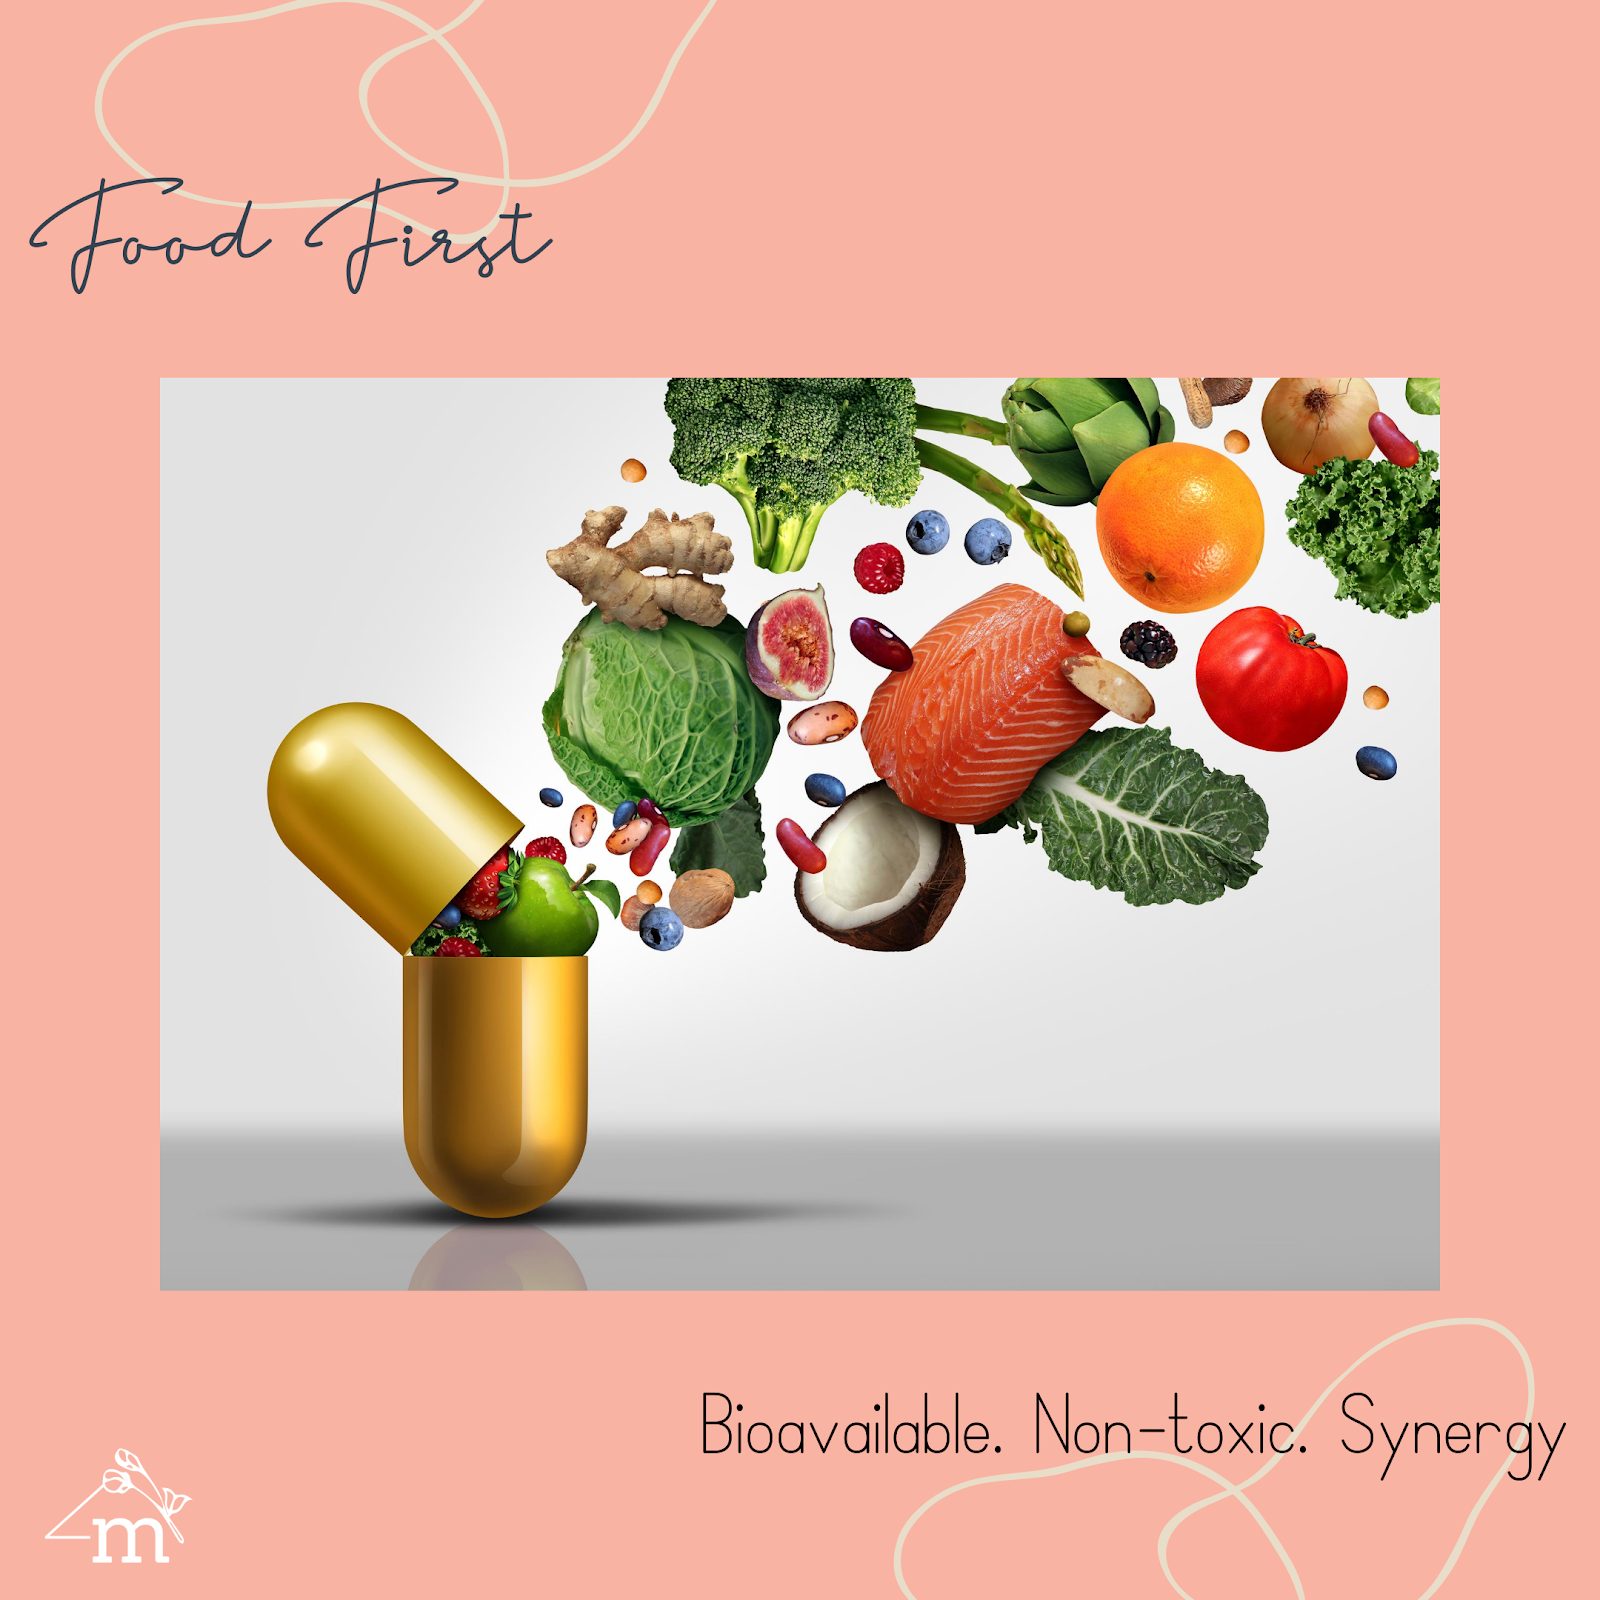 NUTRITION & FERTILITY | AS TOLD BY A FUNCTIONAL PERINATAL NUTRITIONIST